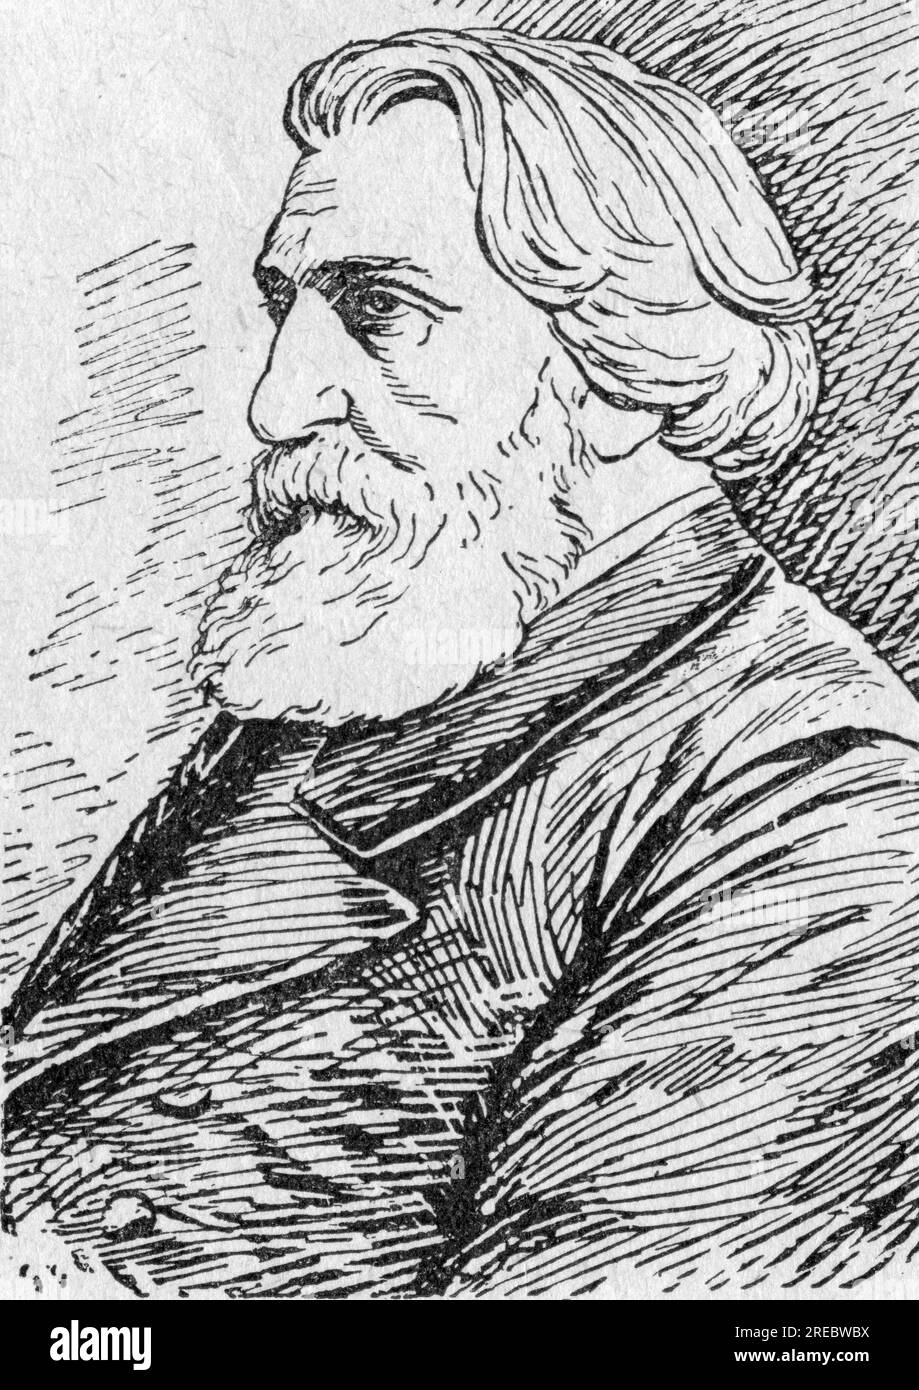 Turgenev, Ivan Sergeyevich, 9.11.1818 - 3.9.1883, Russian writer, woodcut by W. G. Perova, ADDITIONAL-RIGHTS-CLEARANCE-INFO-NOT-AVAILABLE Stock Photo